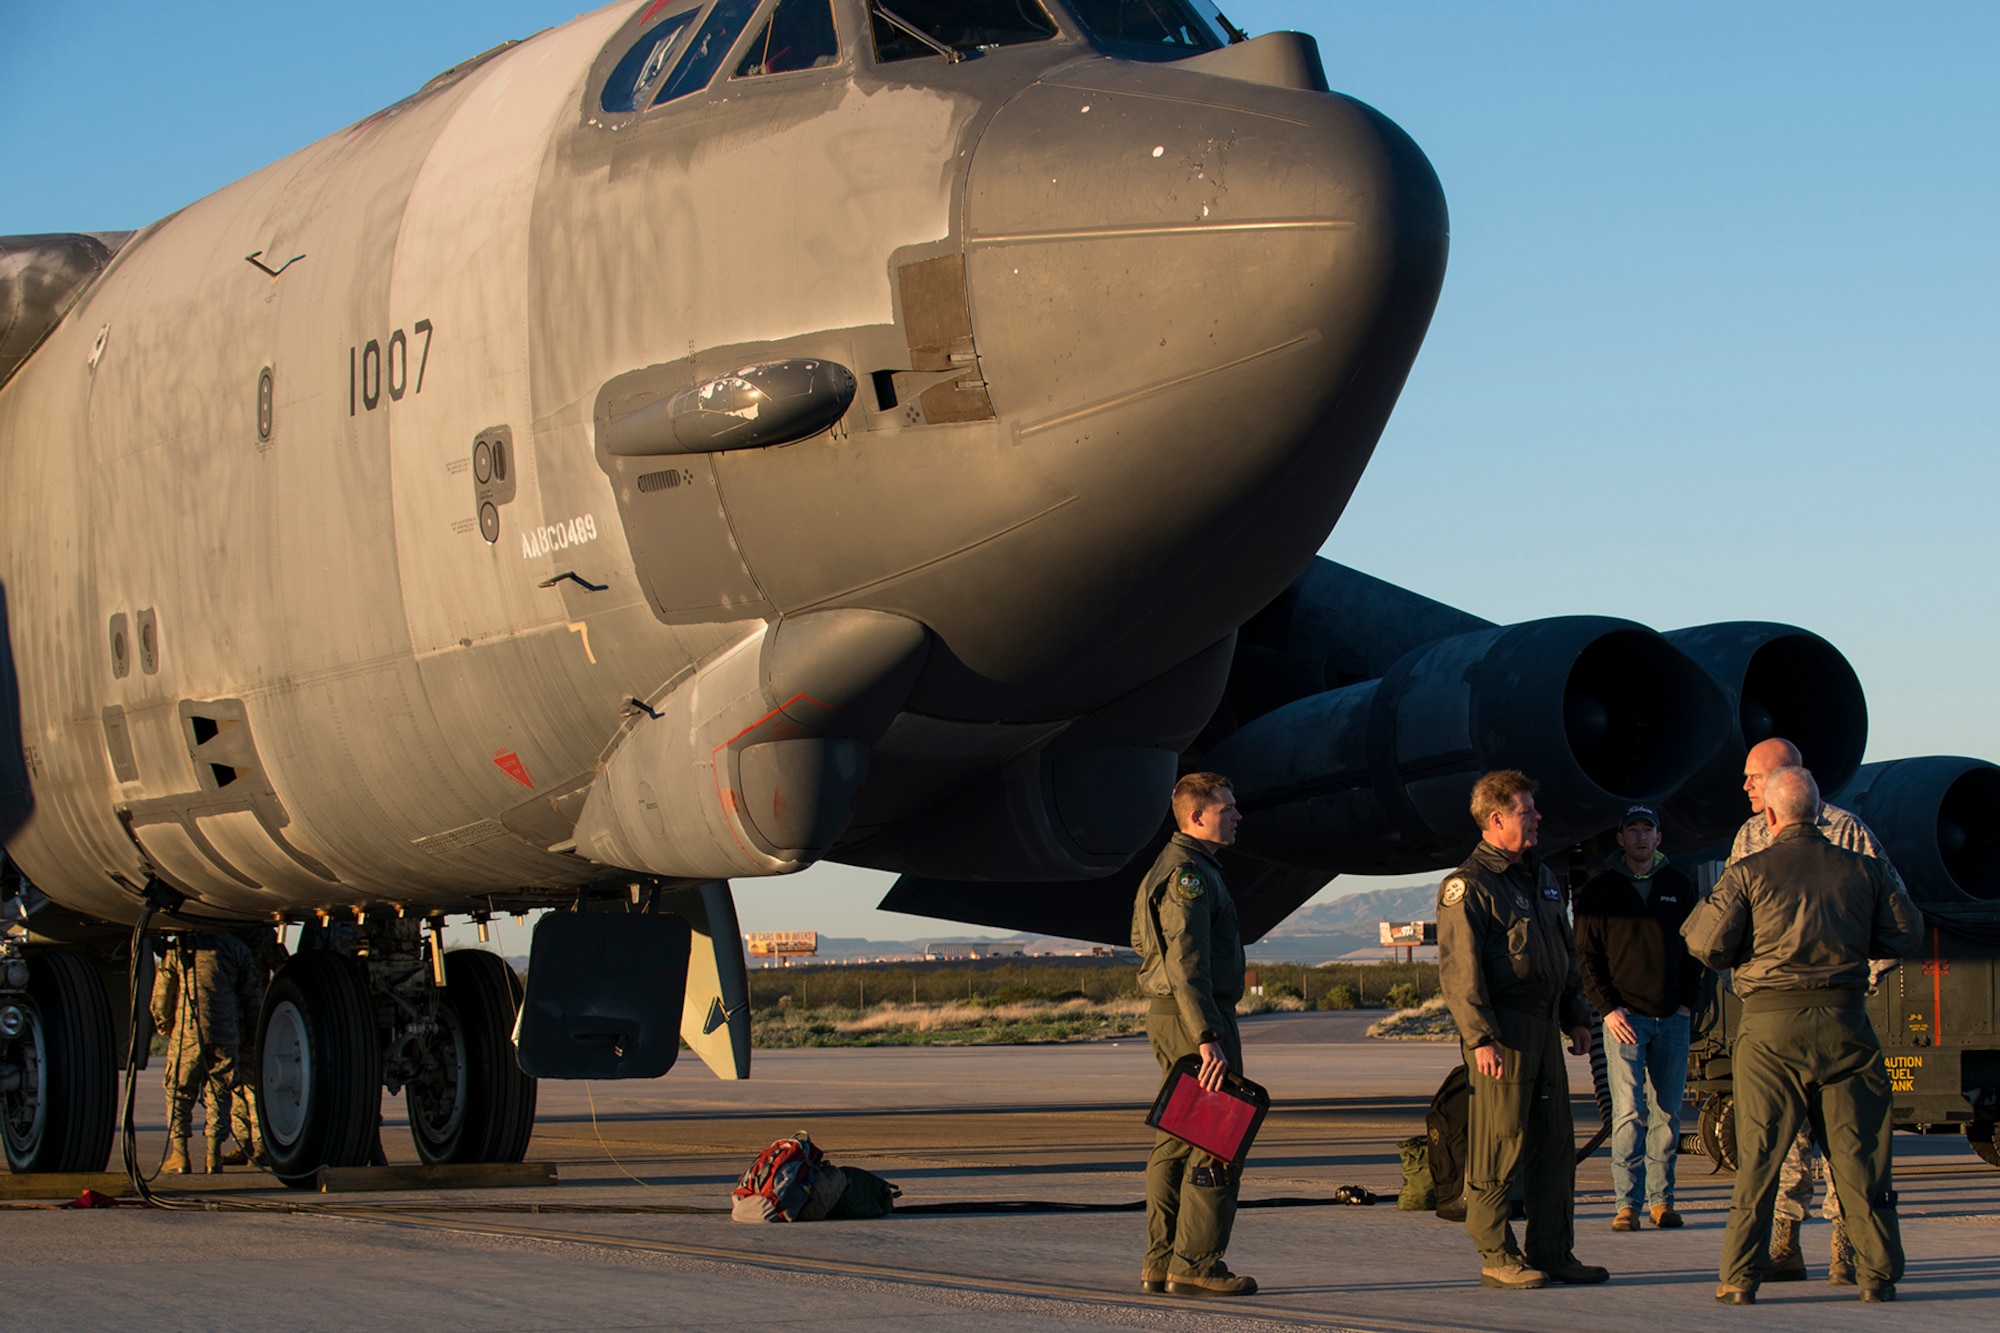 Aircrew arrive to perform a taxi test on a B-52H Stratofortress, Feb. 12, 2015, Davis-Monthan Air Force Base, Ariz. The aircraft, known as the "Ghost Rider", was decommissioned in 2008 and has been sitting in storage at the 309th Aerospace Maintenance and Regeneration Group's "Boneyard". (U.S. Air Force photo by Master Sgt. Greg Steele/Release)